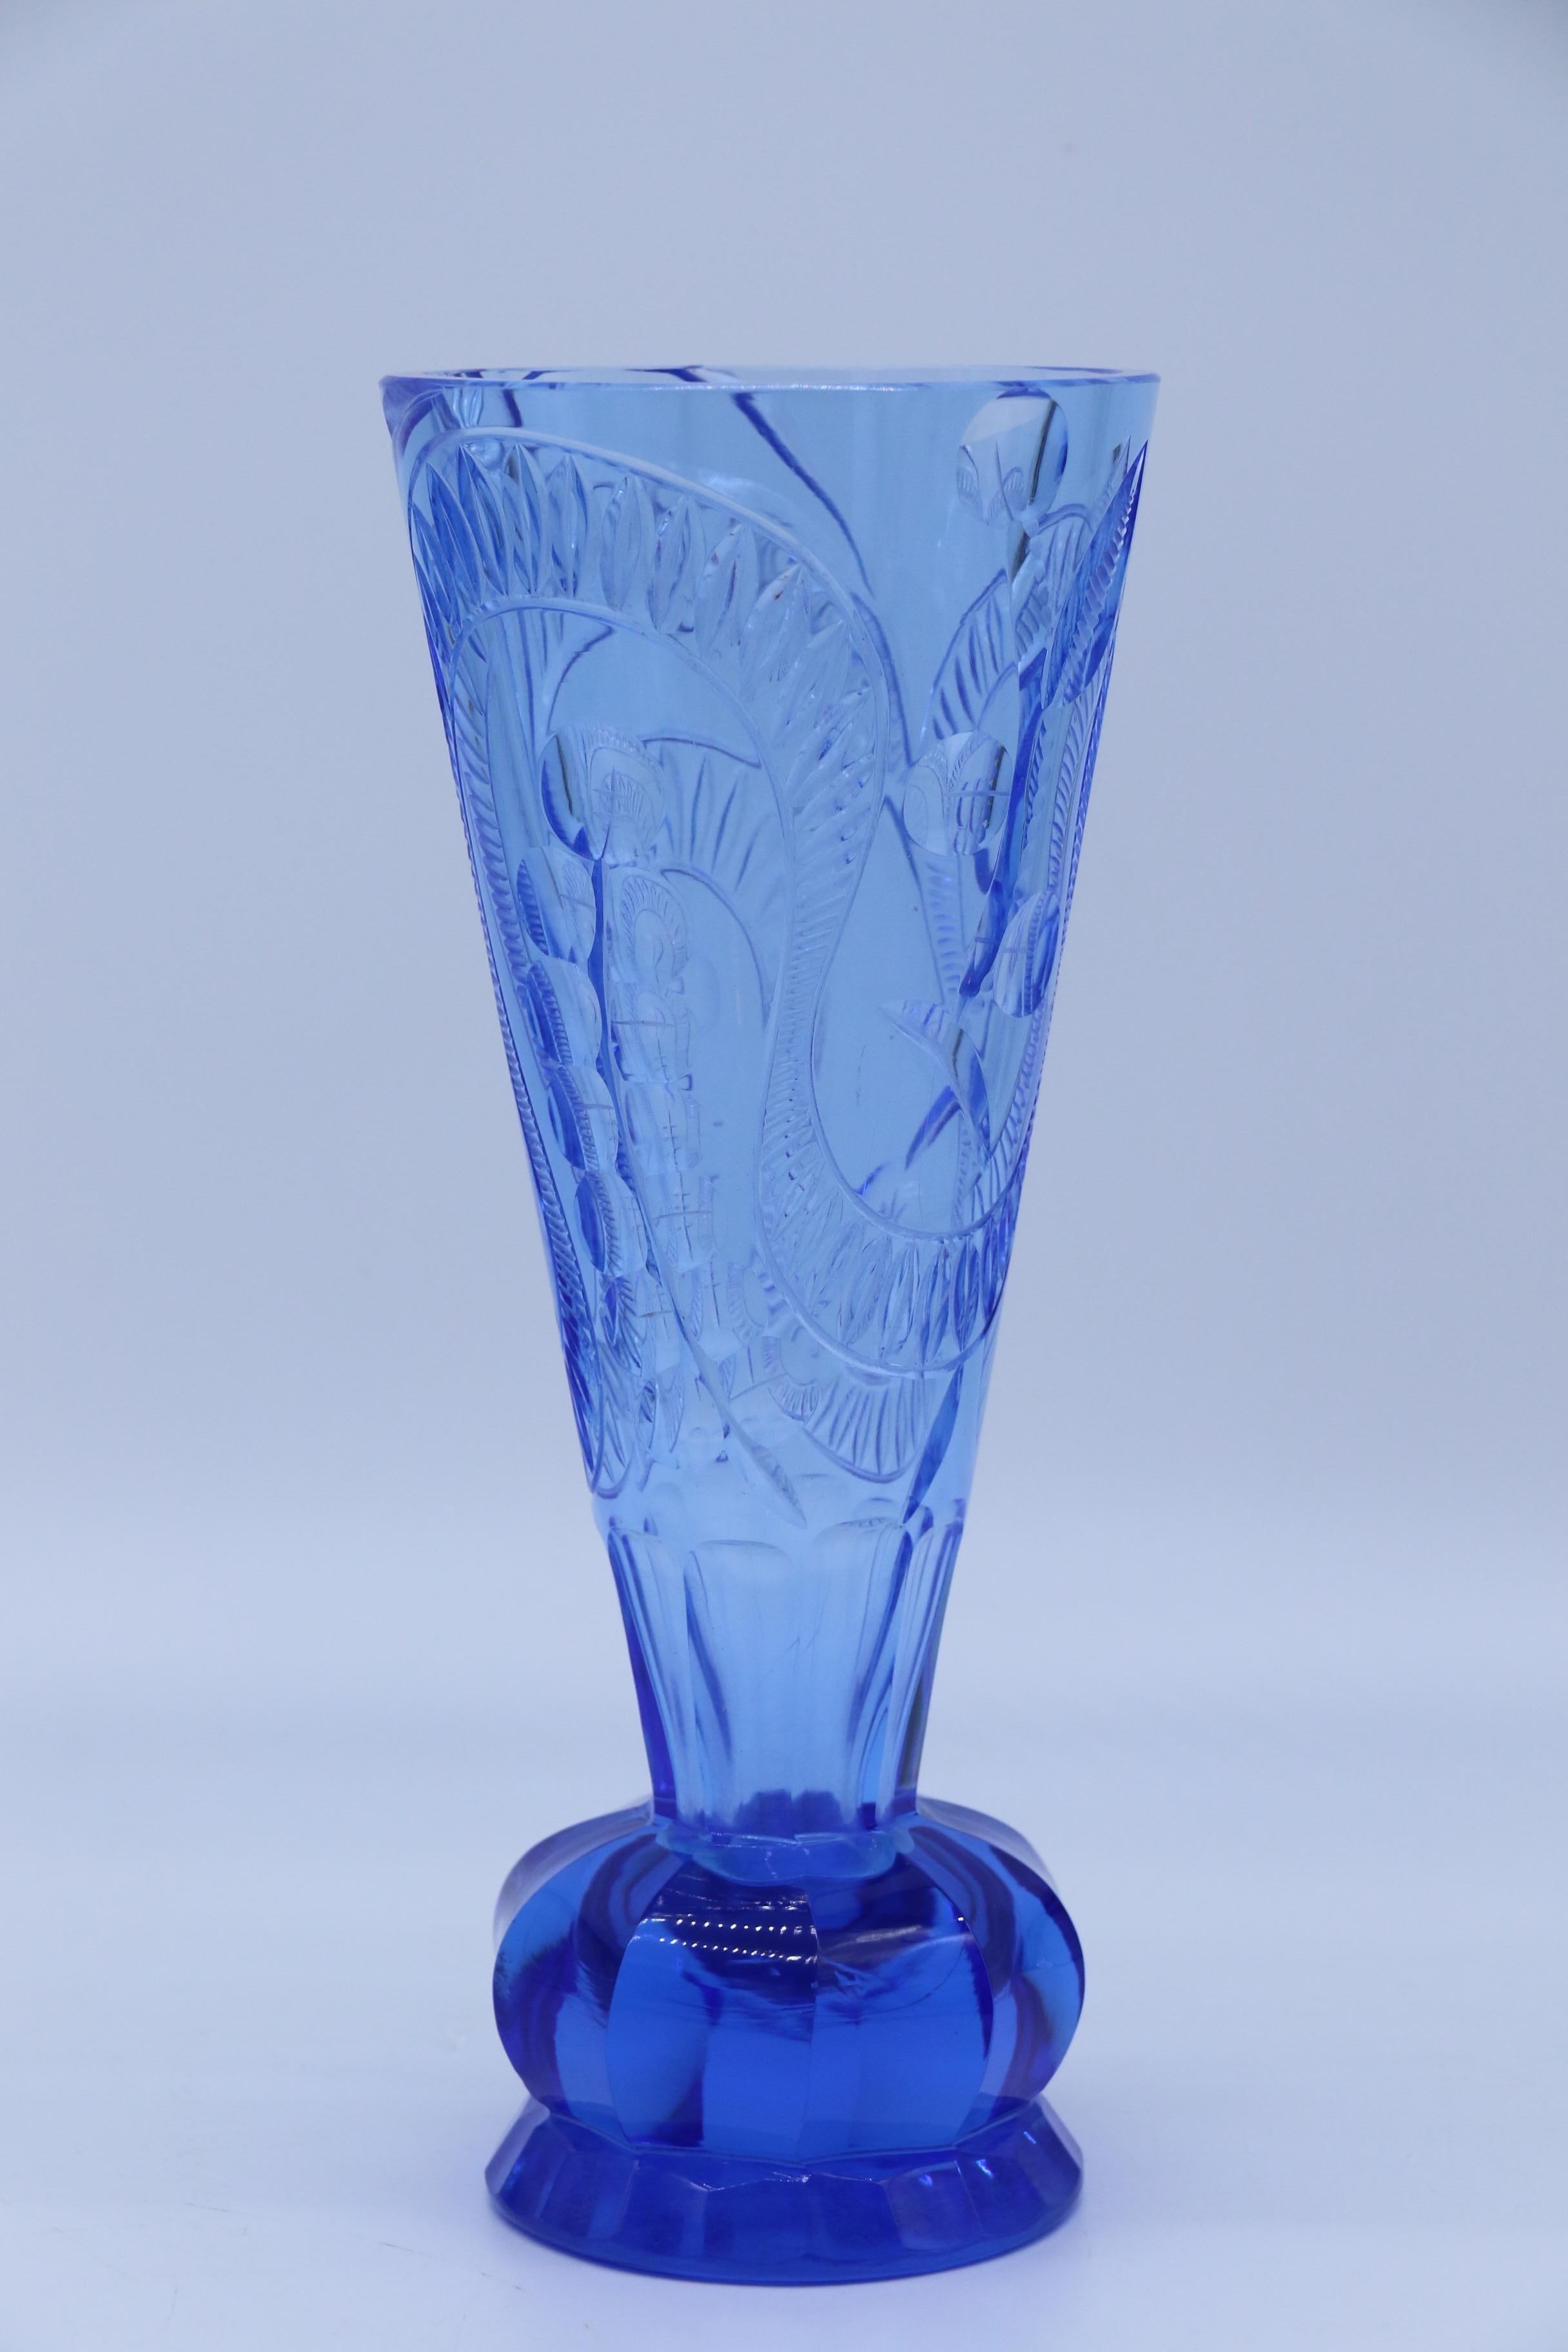 This remarkable vase dates to circa 1930.  It has a circular facetted foot and above a heavy solid glass base with ten scalloped sides around its circumference. The conical shaped vase rises elegantly straight up to the rim and is decorated with an